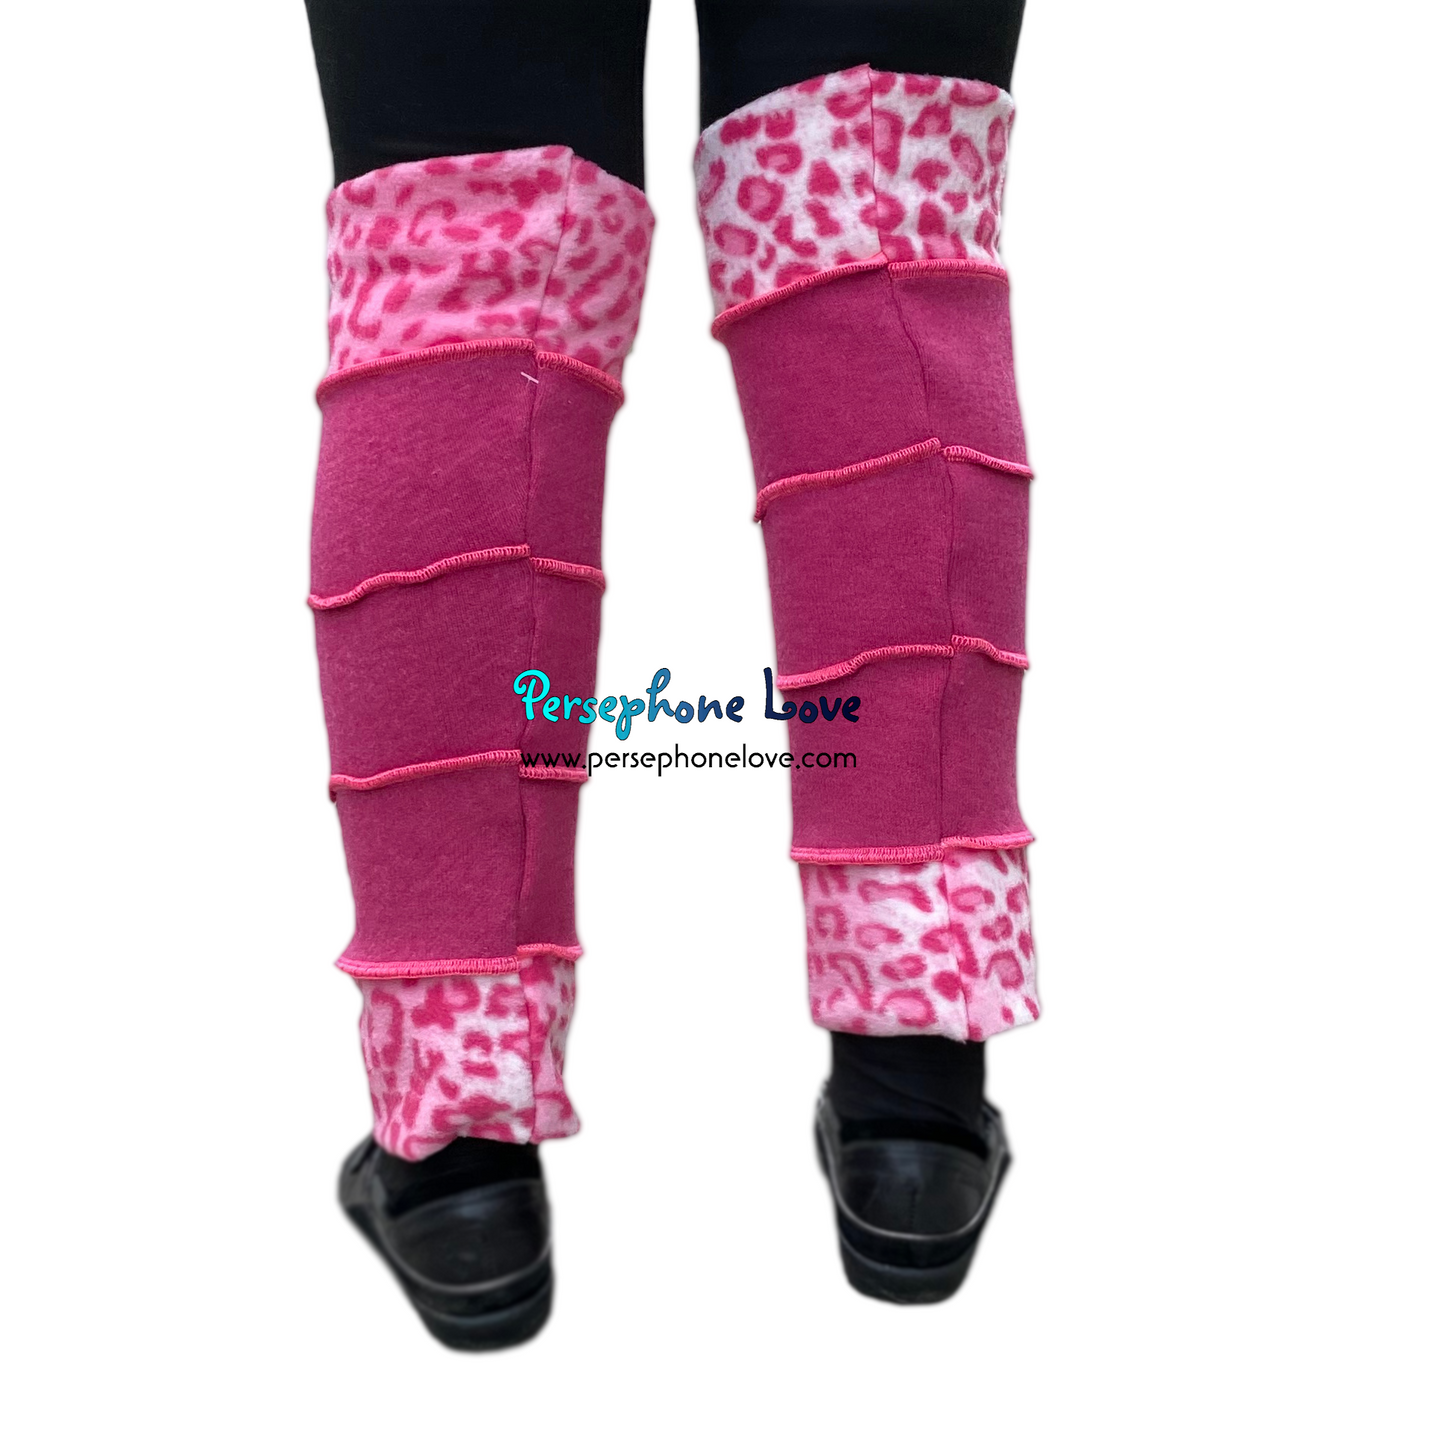 Katwise-inspired felted 100% cashmere leg warmers-1597